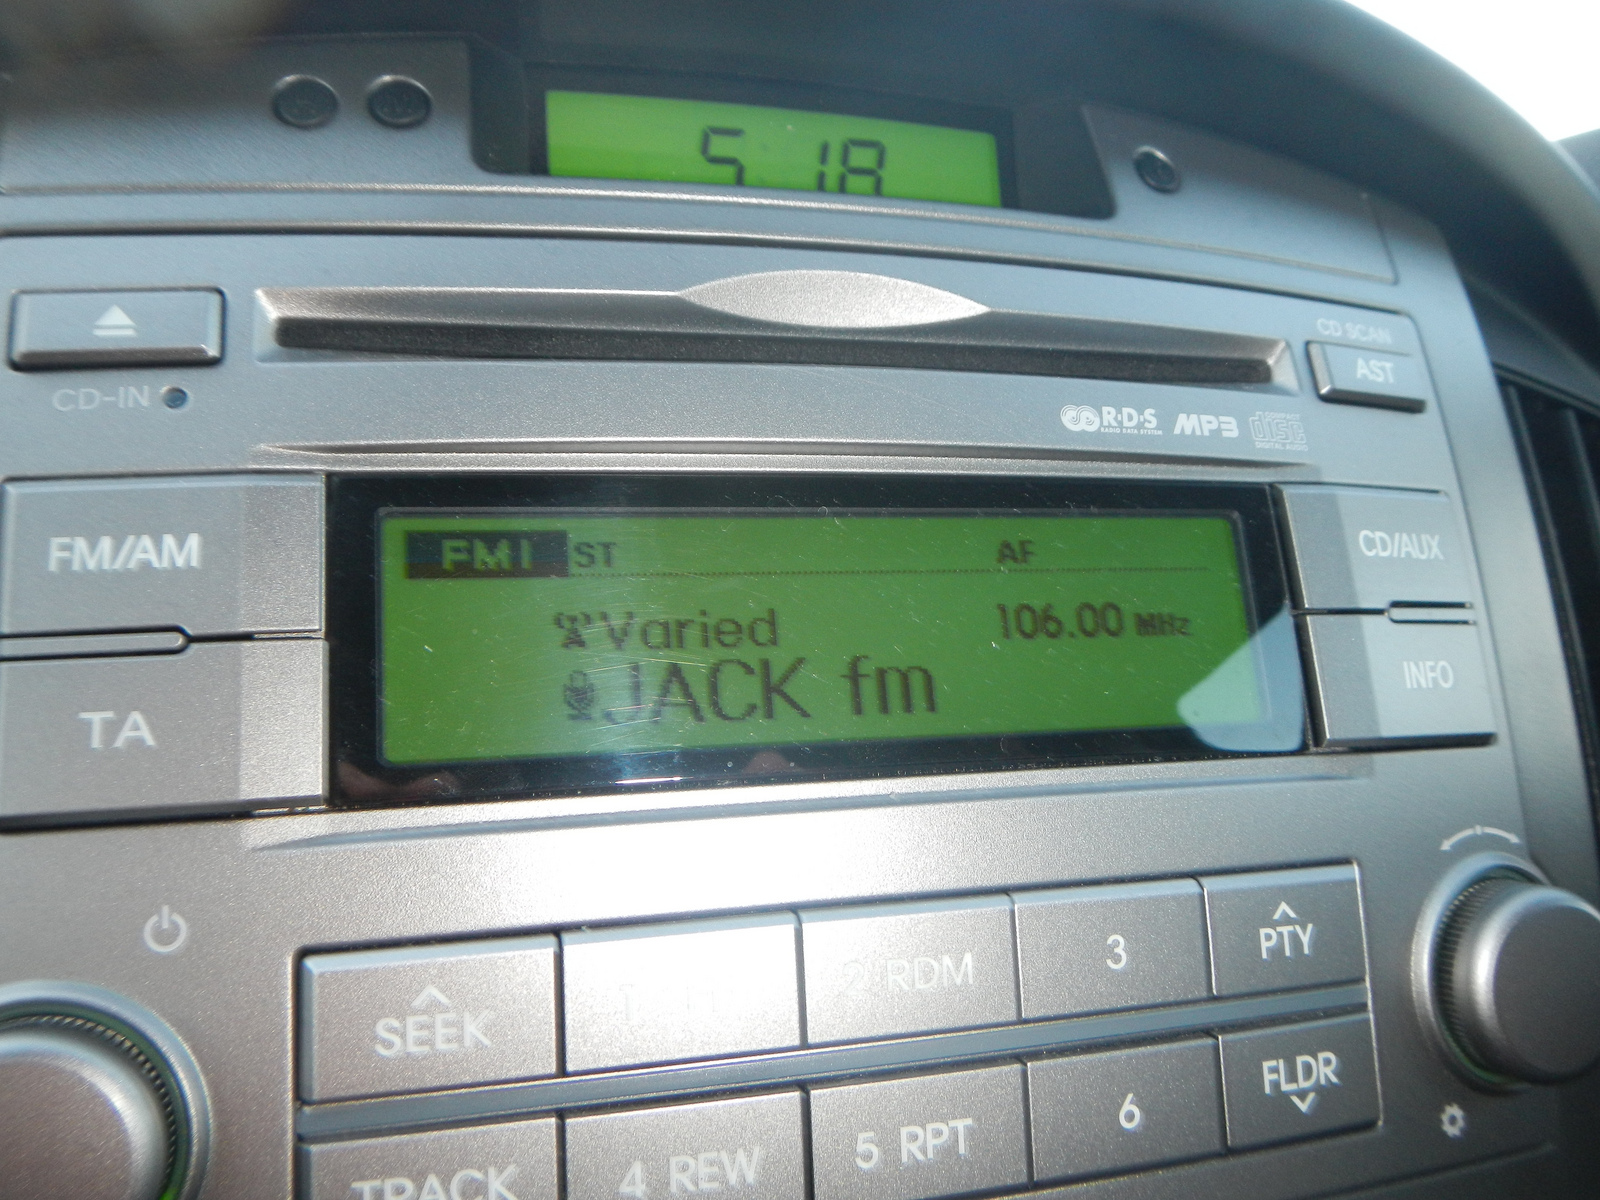  ​We listened to Jack FM in the UK! 